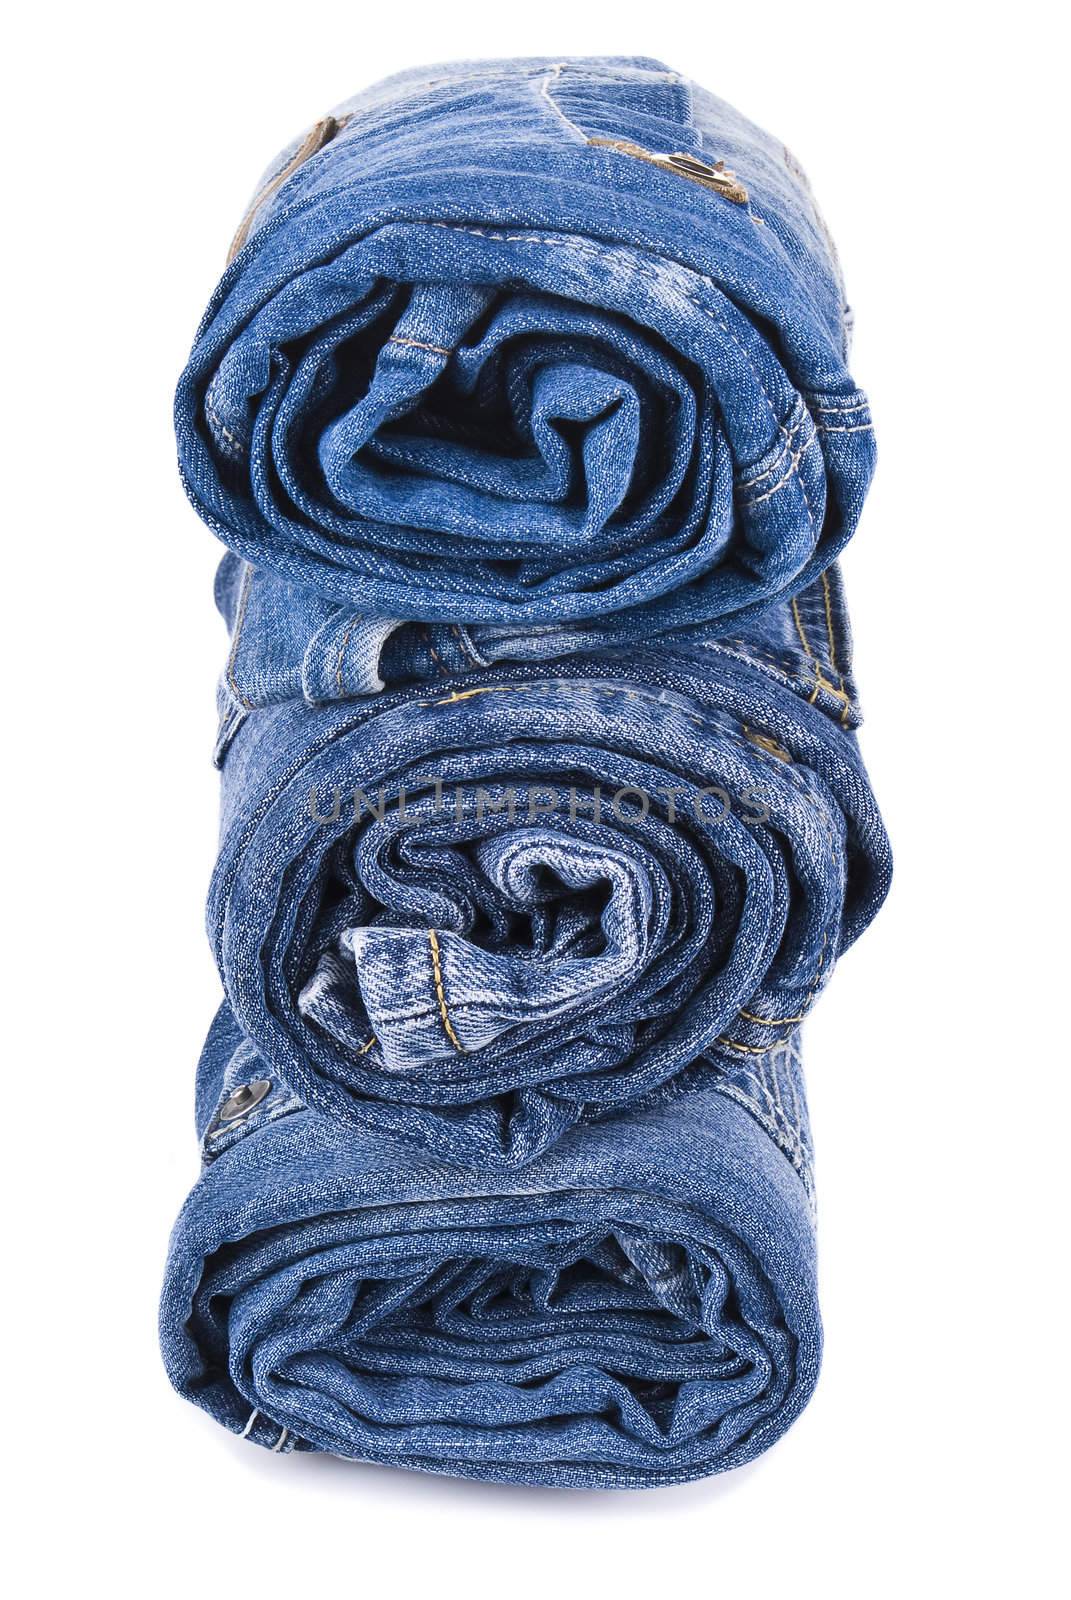 stack of various shades of blue jeans over white background